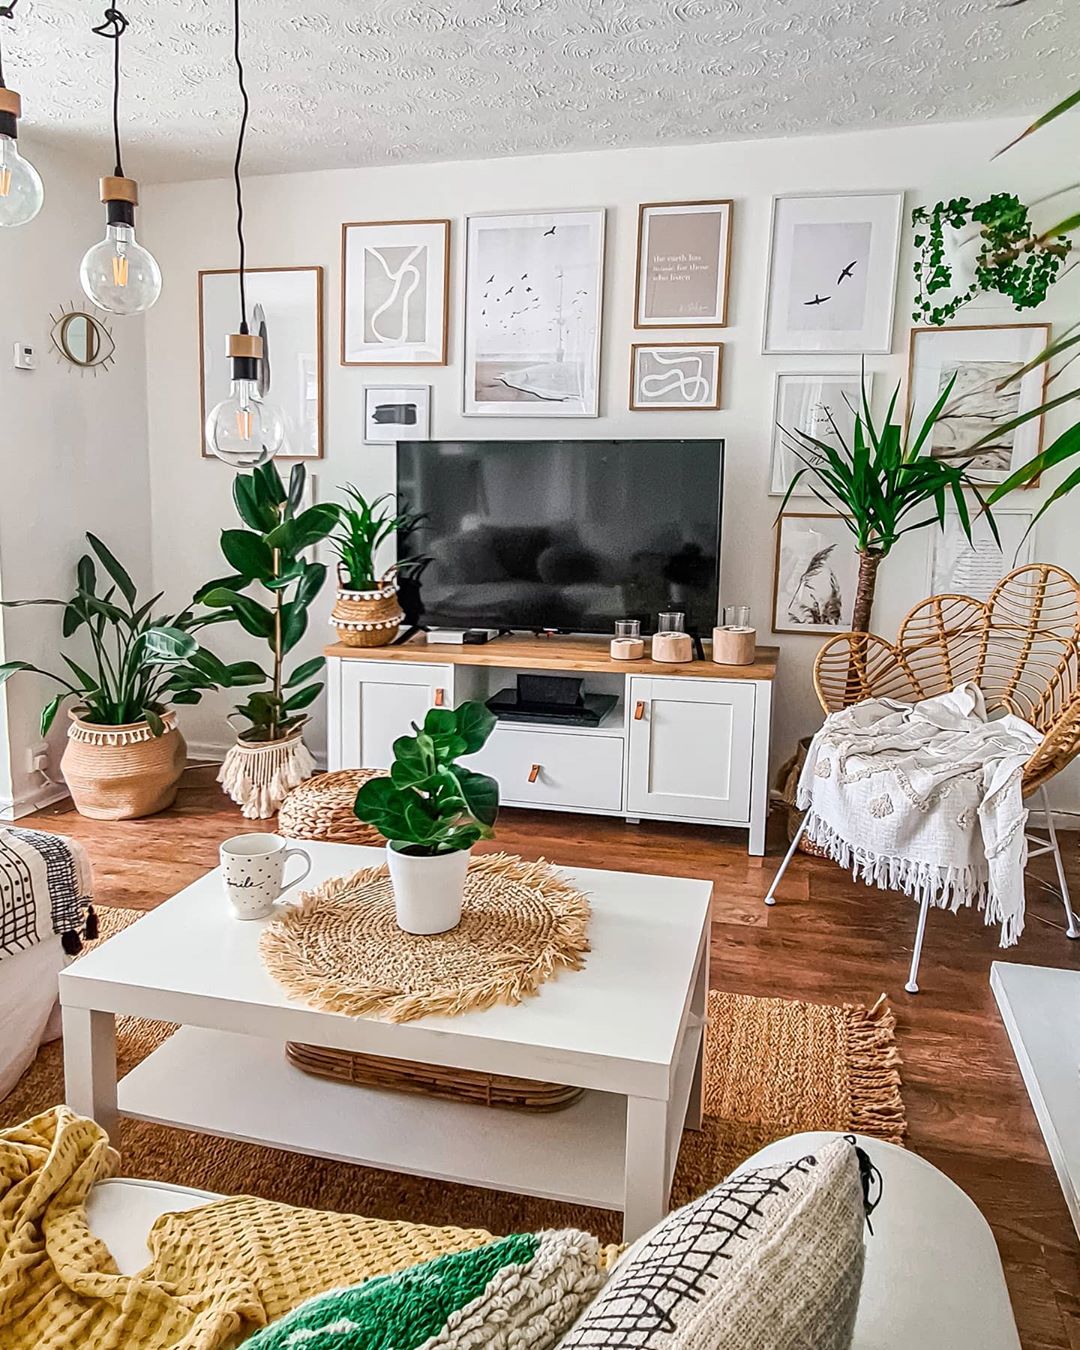 16 Simple Small Living Room Ideas Brimming With Style   Decoholic